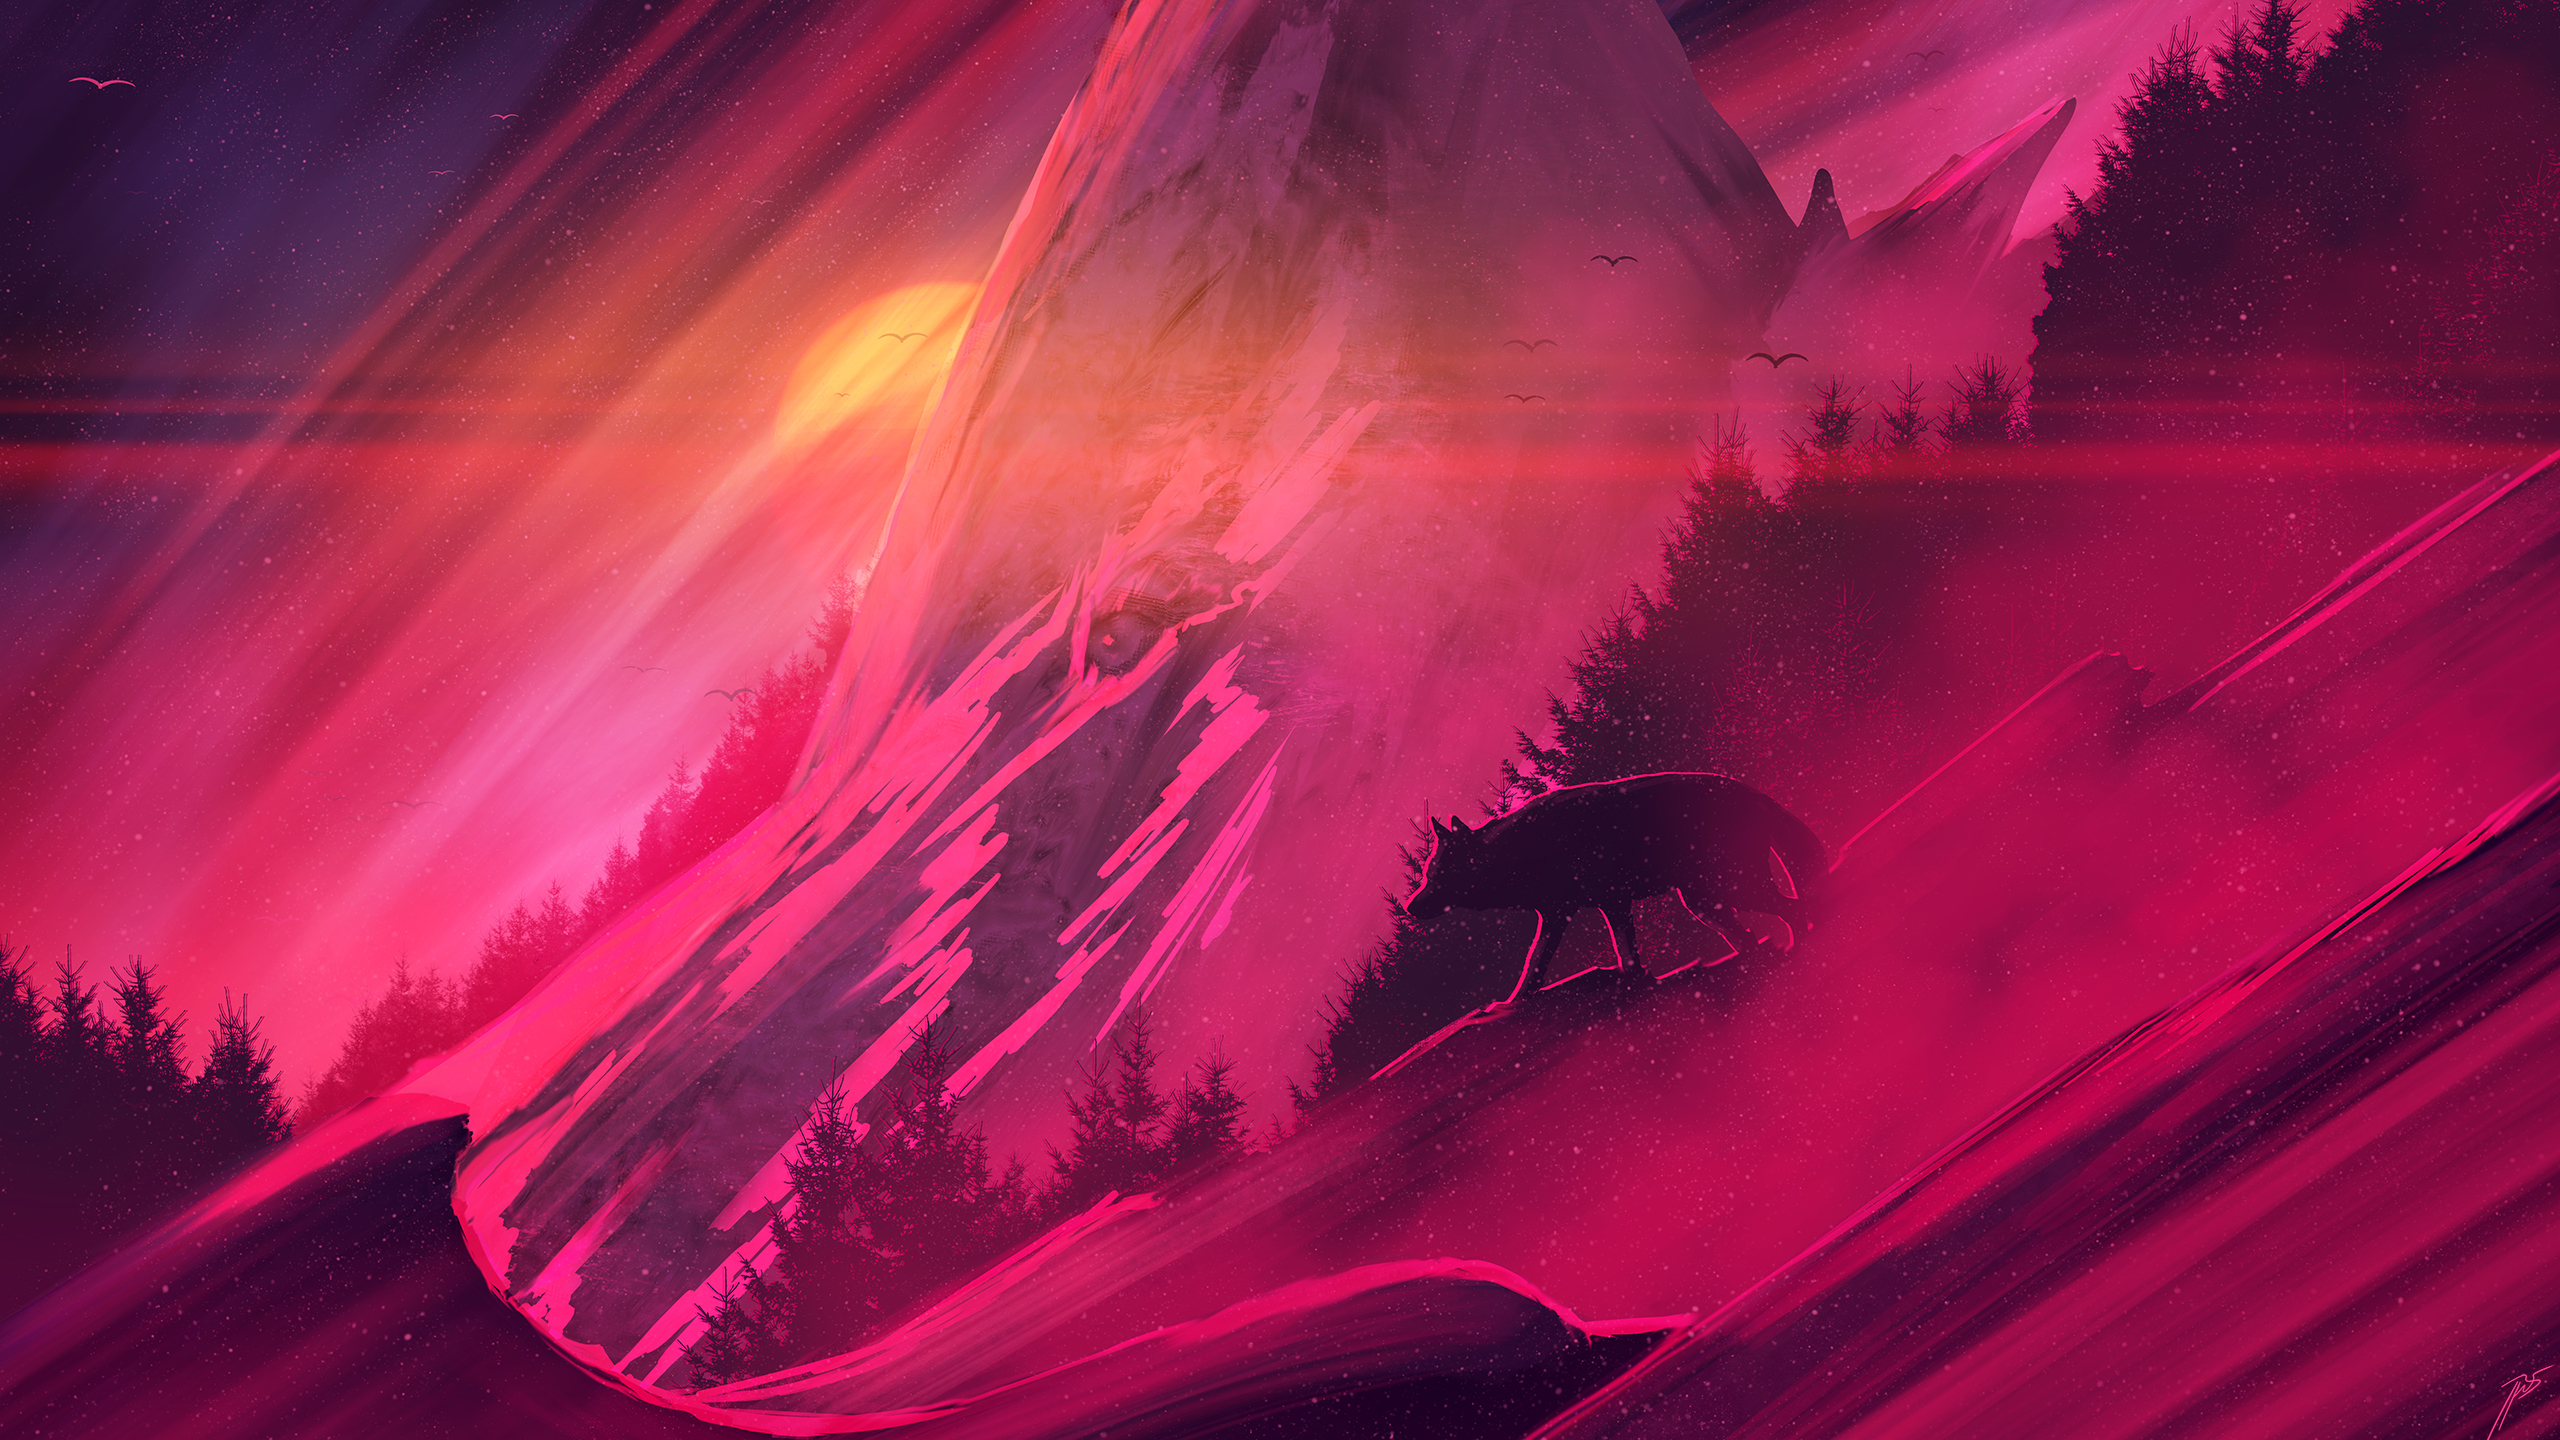 General 2560x1440 JoeyJazz wolf animals abstract red pink mountains